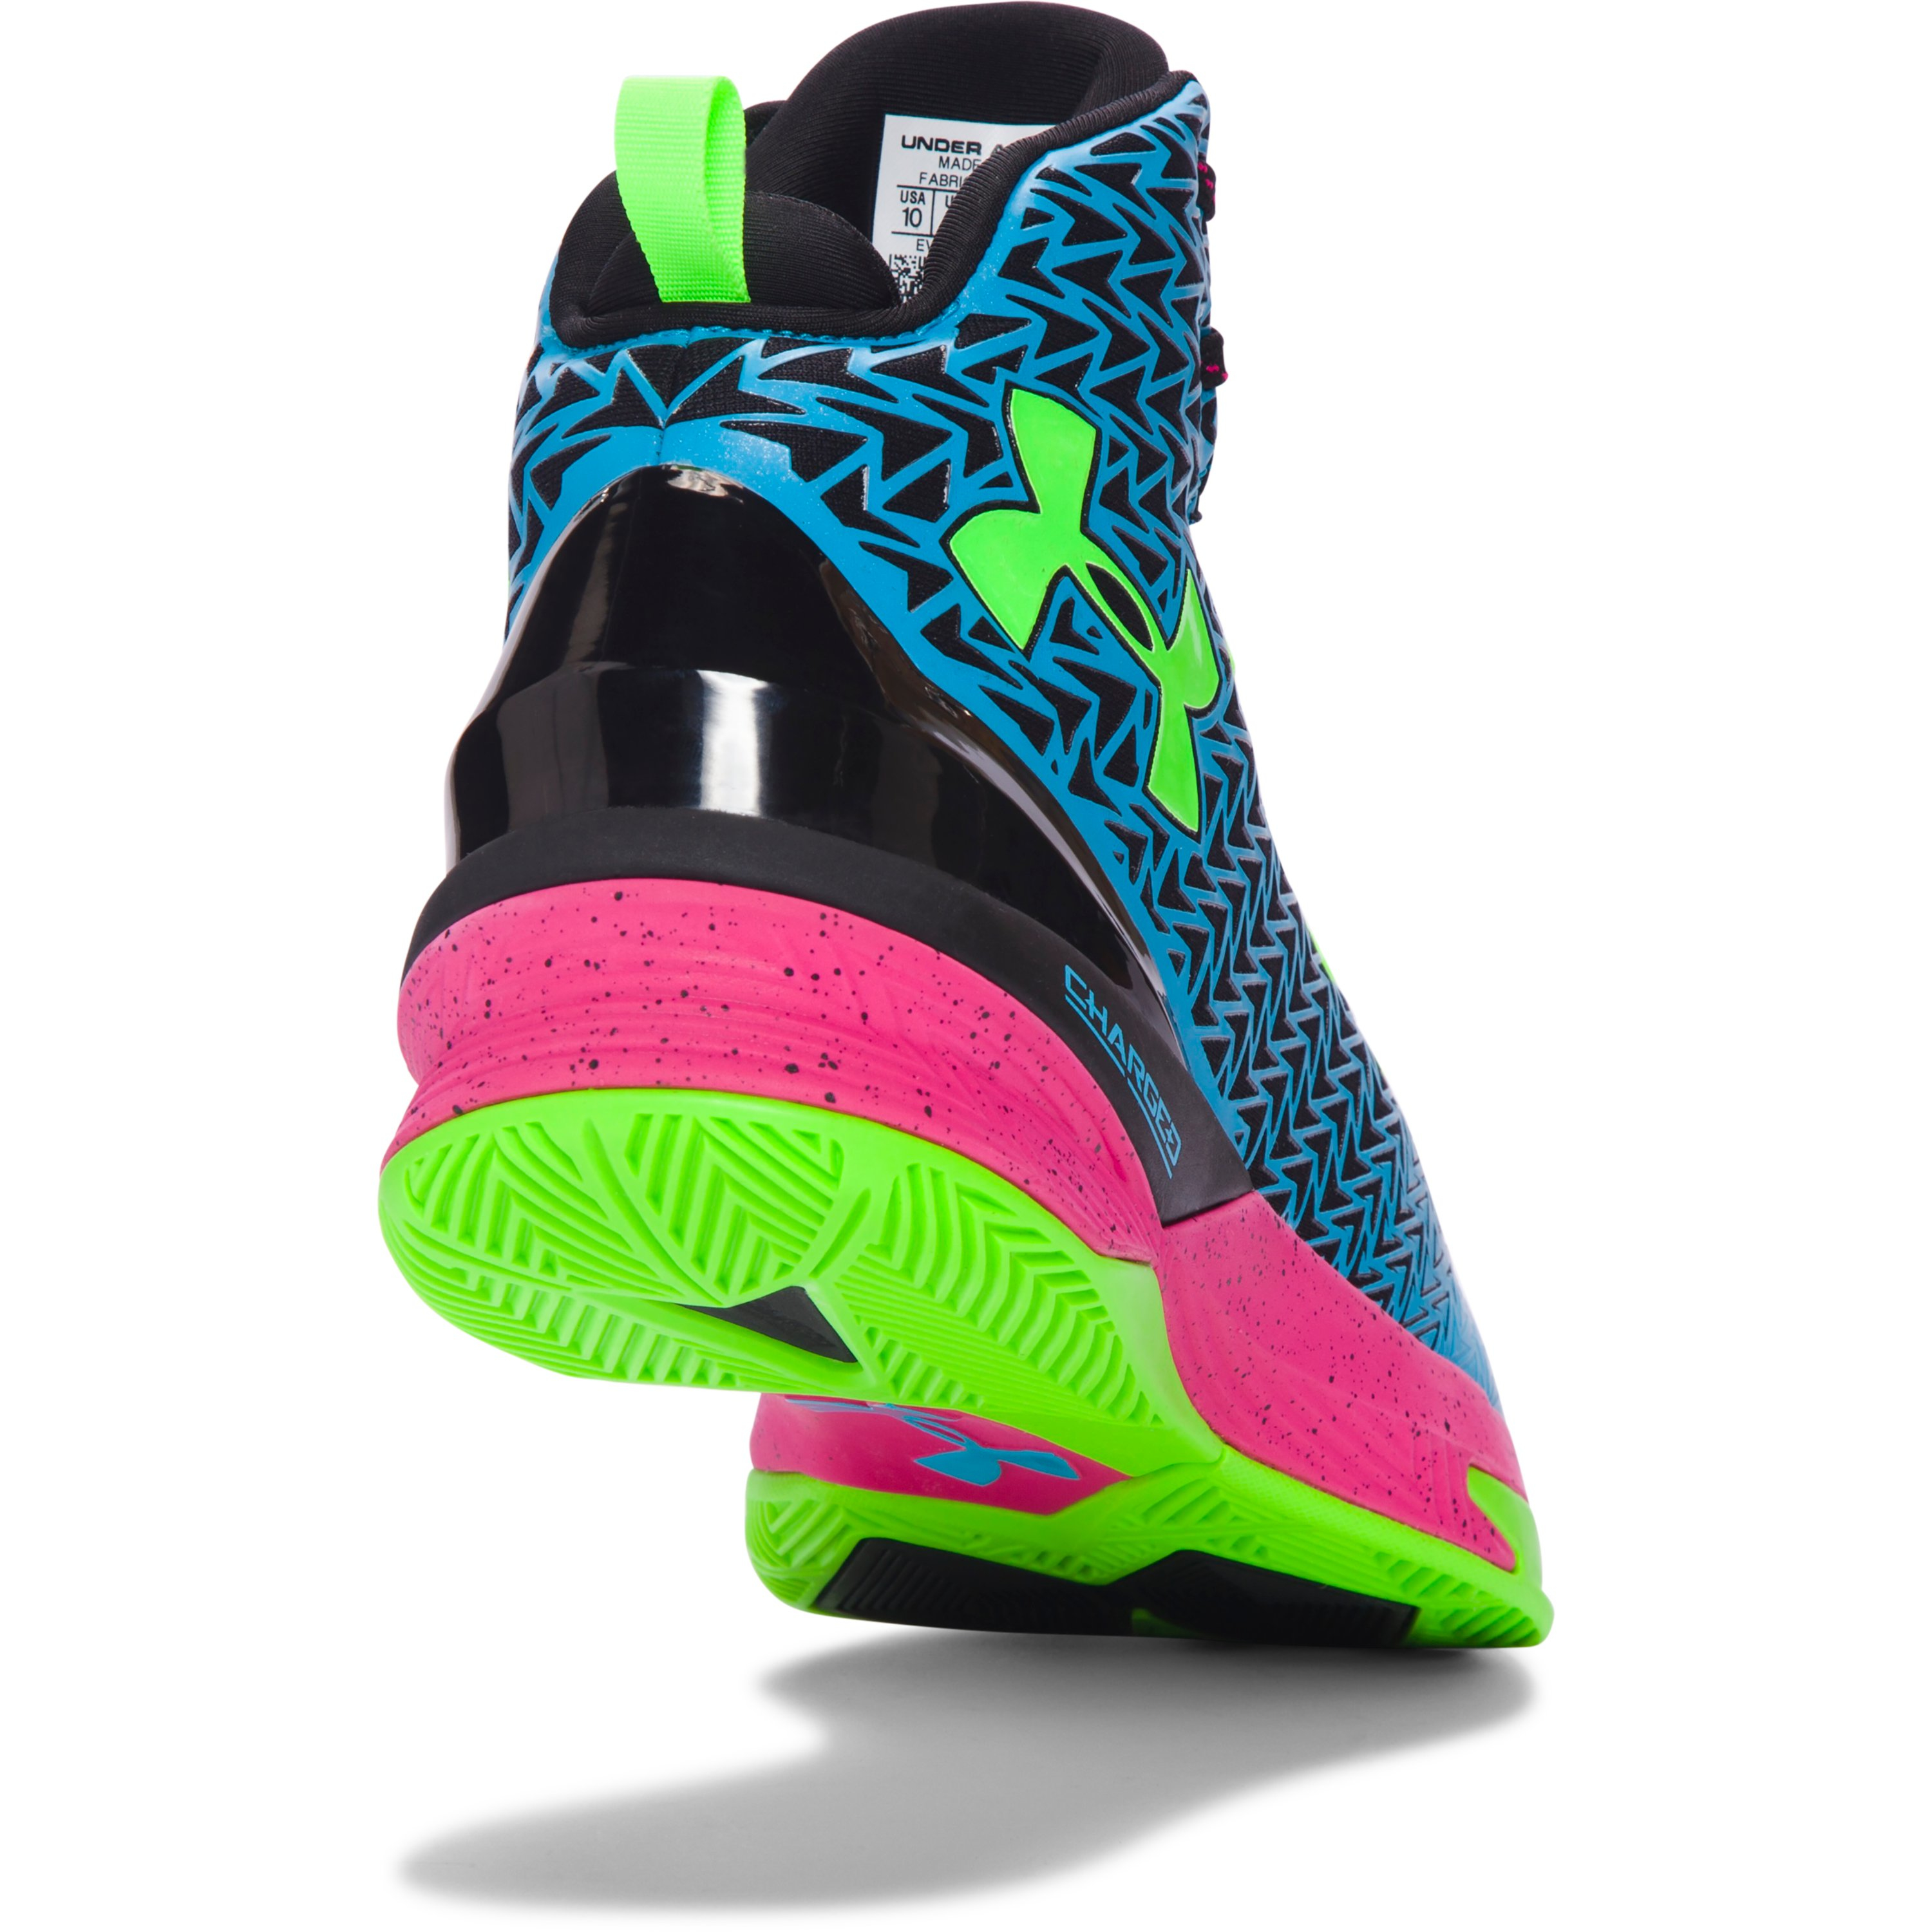 78 Limited Edition Bright pink under armour shoes Combine with Best Outfit